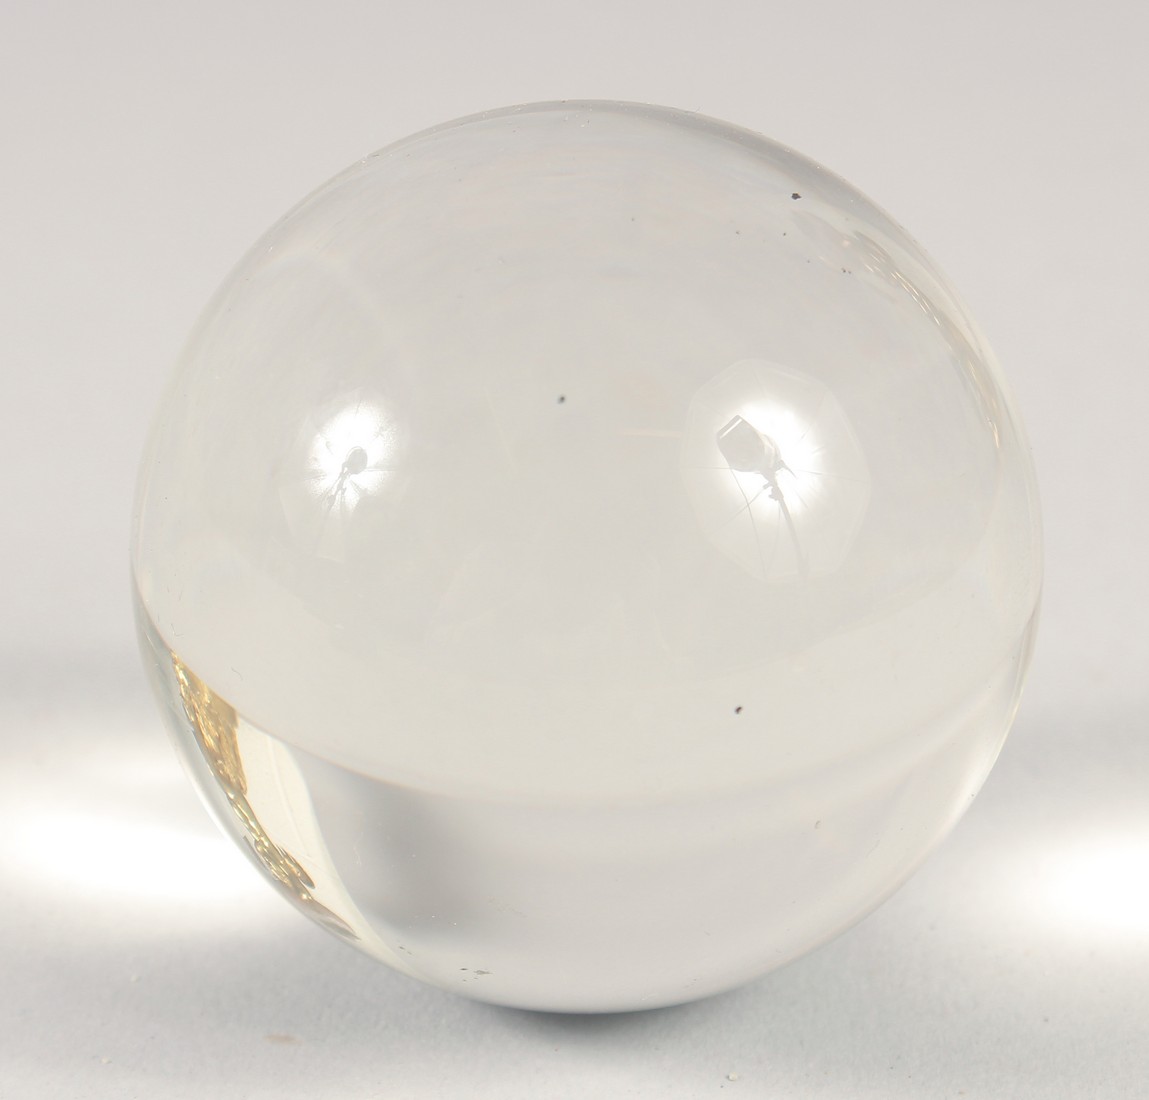 A CRYSTAL BALL on a wooden stand. 2.5ins diameter. - Image 2 of 3